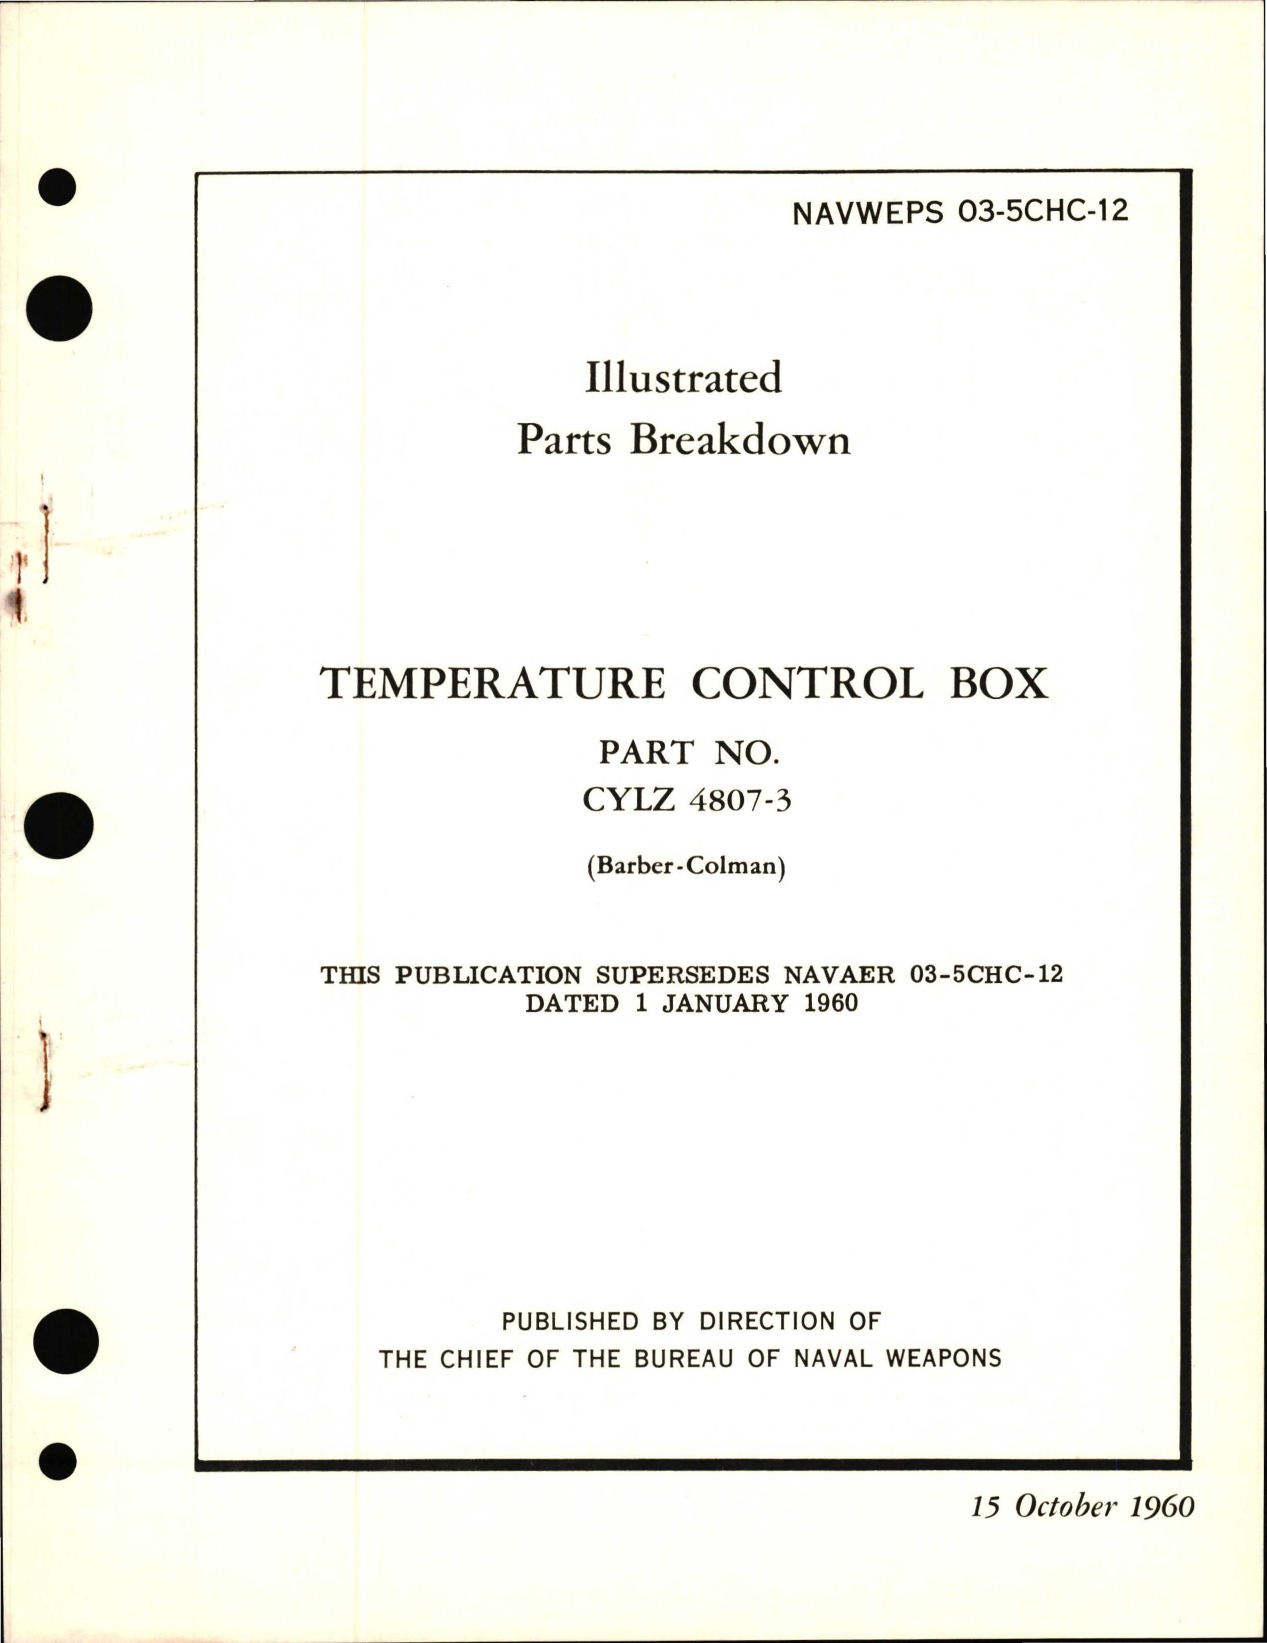 Sample page 1 from AirCorps Library document: Illustrated Parts Breakdown for Temperature Control Box - Part CYLZ 4807-3 